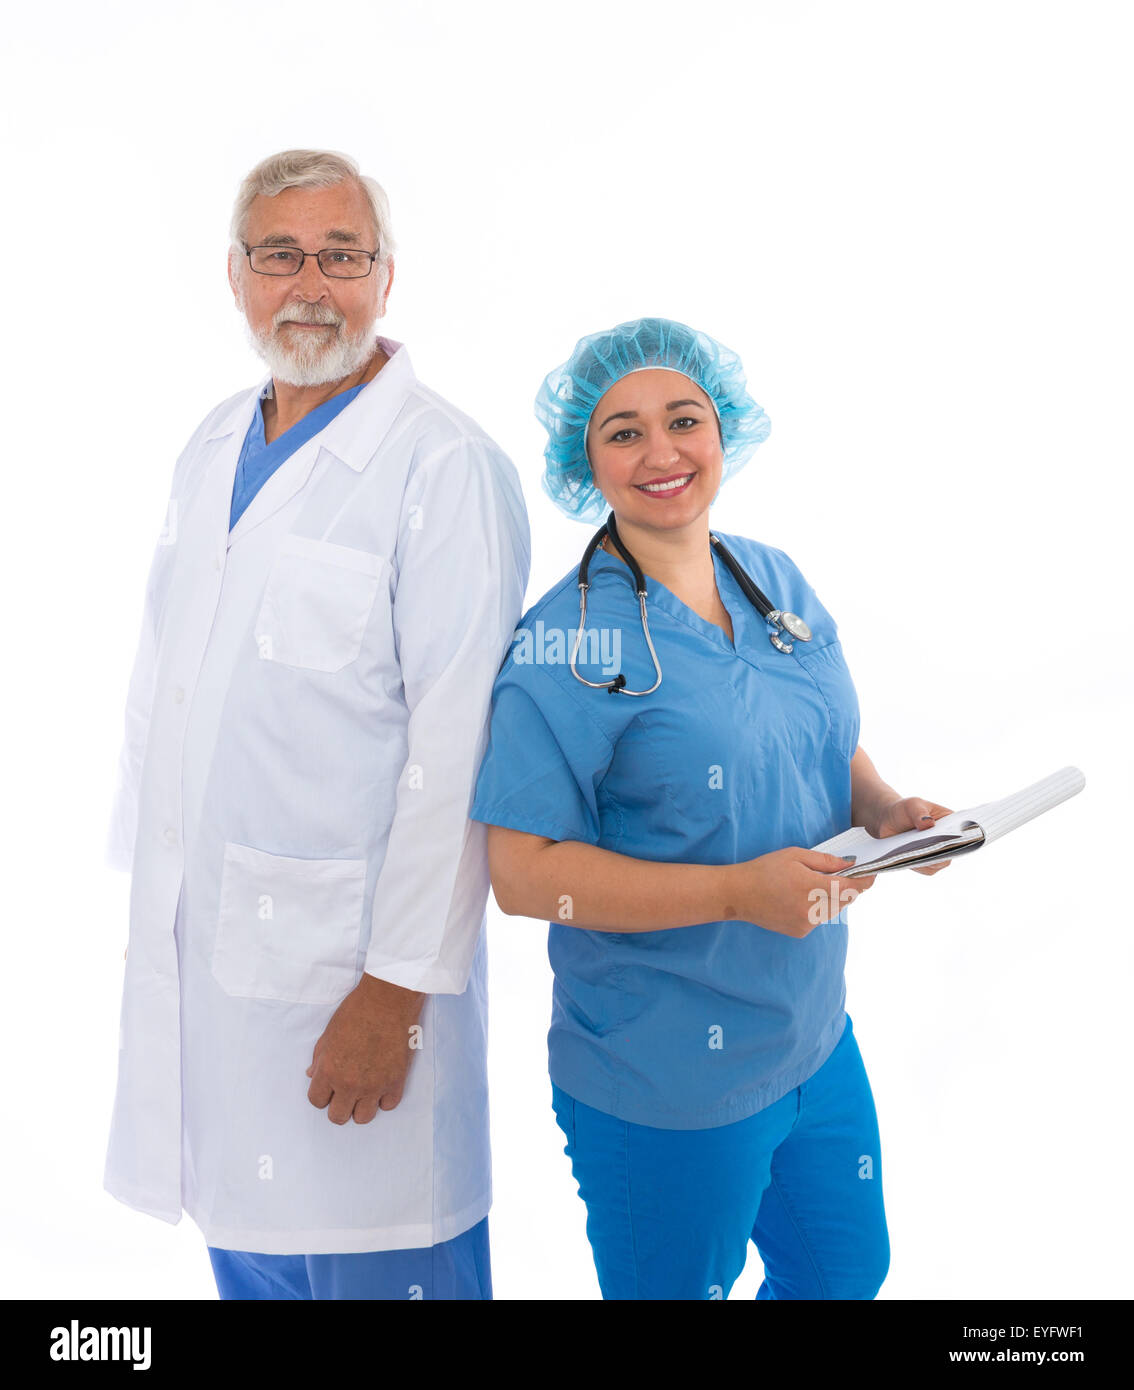 Doctor and Nurse looking at camera Banque D'Images